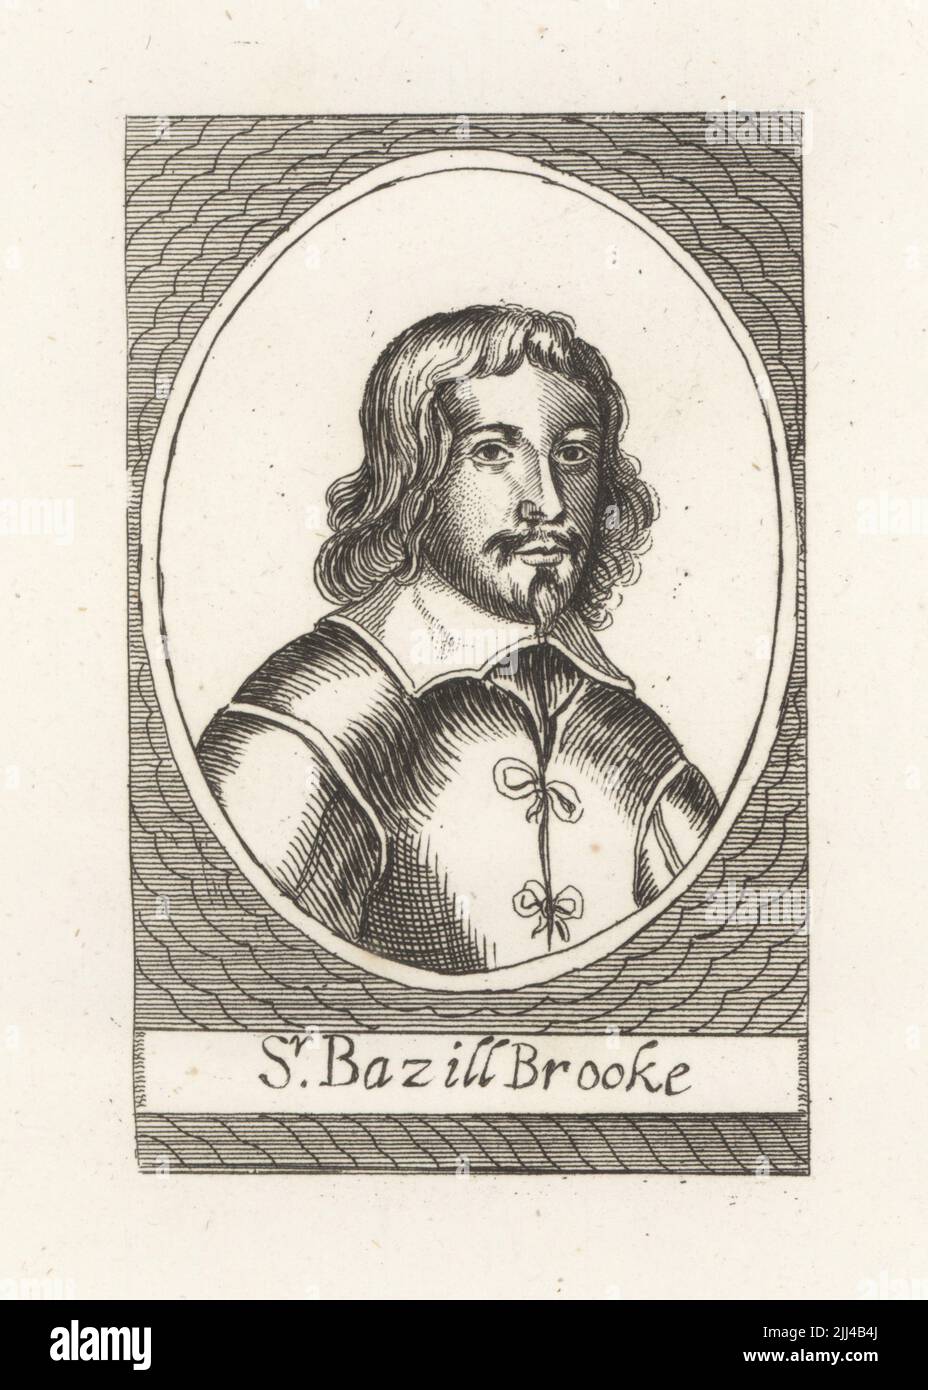 Sir Basil Brooke, royalist conspirator and rich ironfounder. 1576-1646. Sir Bazill Brooke. From a very rare print. Copperplate engraving from Samuel Woodburn’s Gallery of Rare Portraits Consisting of Original Plates, George Jones, 102 St Martin’s Lane, London, 1816. Stock Photo